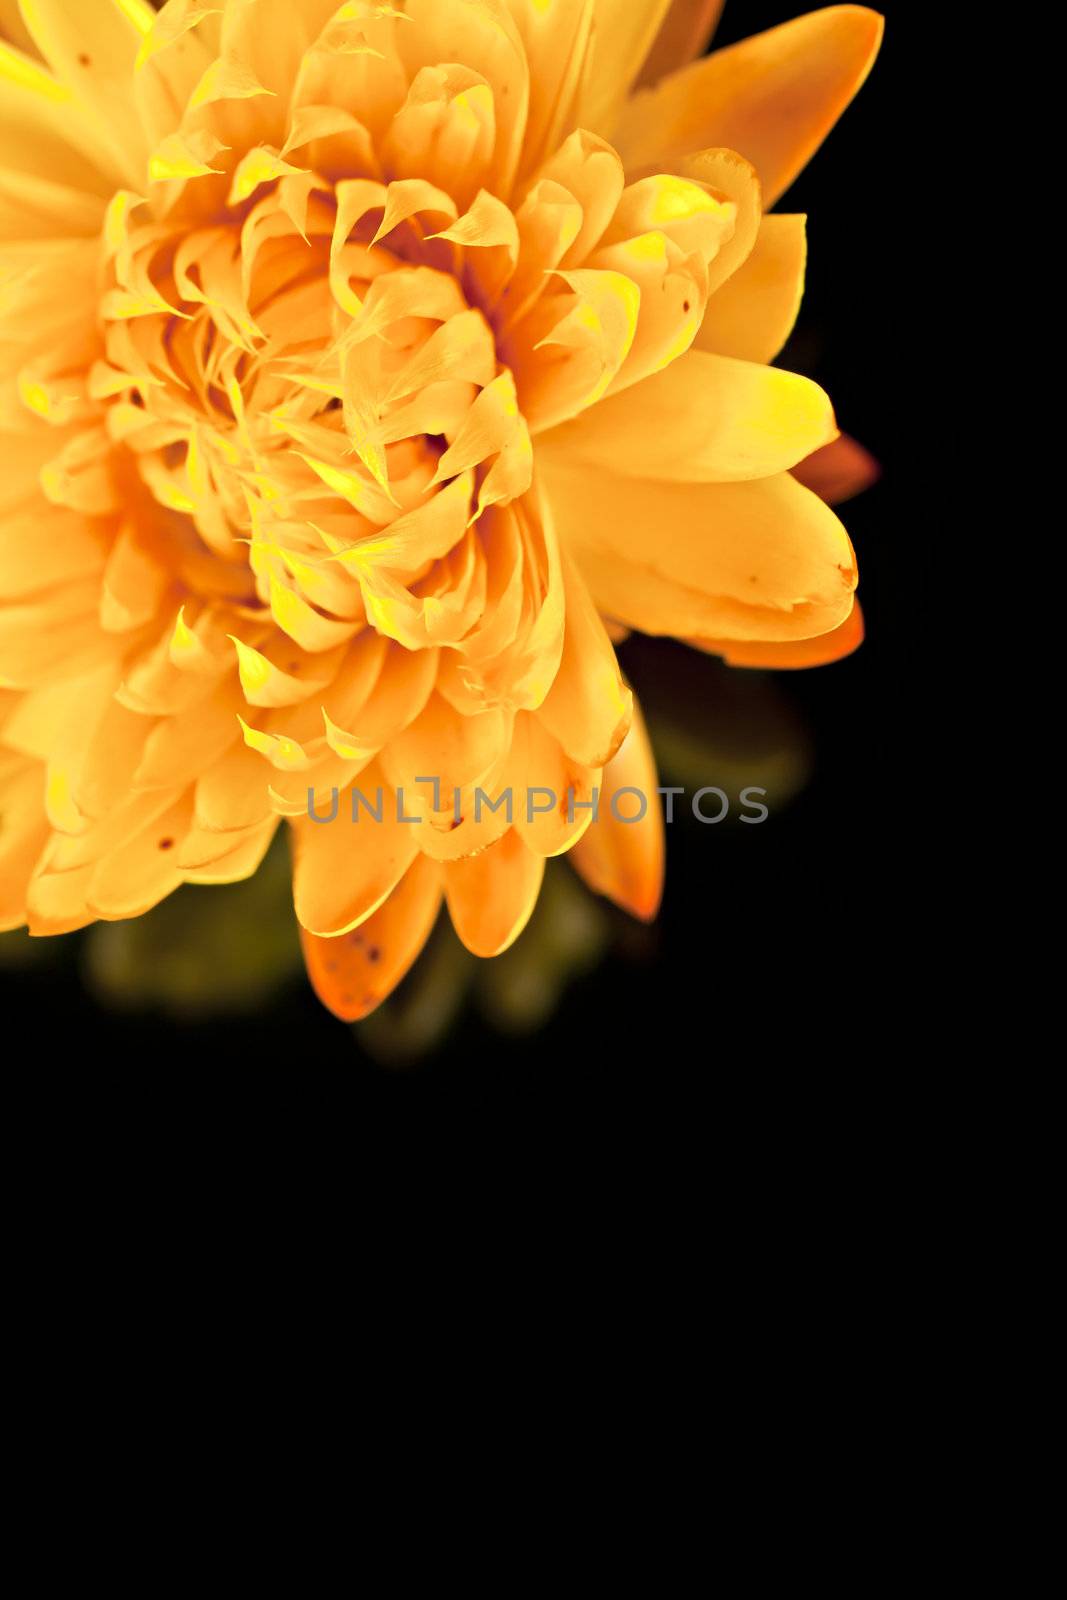 Dried yellow flower  on a black background mirror.